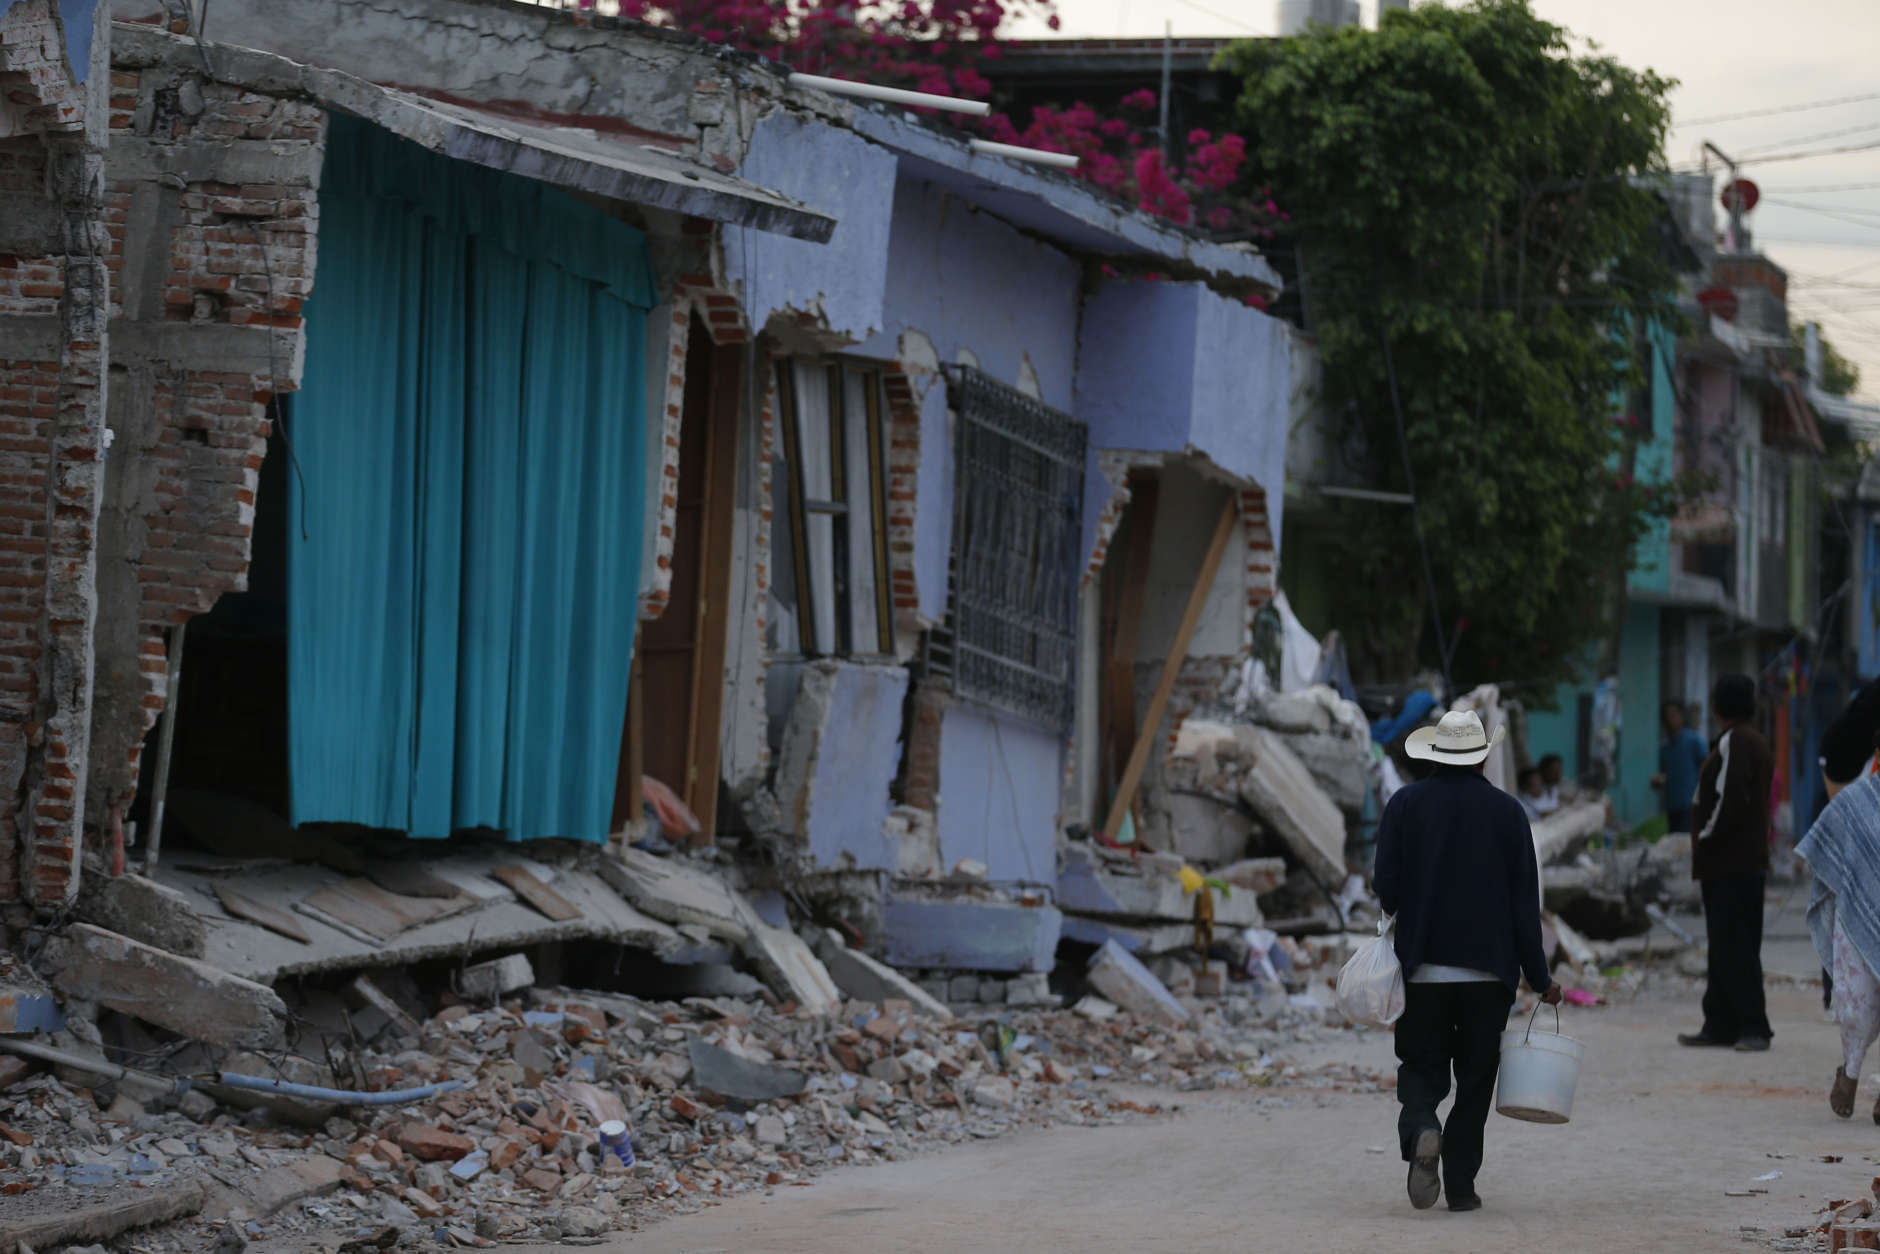 A man walks past homes damaged by a 7.1 earthquake, in Jojutla, Morelos state, Mexico, Wednesday, Sept. 20, 2017. Police, firefighters and ordinary Mexicans are digging frantically through the rubble of collapsed schools, homes and apartment buildings, looking for survivors of Mexico's deadliest earthquake in decades as the number of confirmed fatalities climbed to 248. (AP Photo/Eduardo Verdugo)